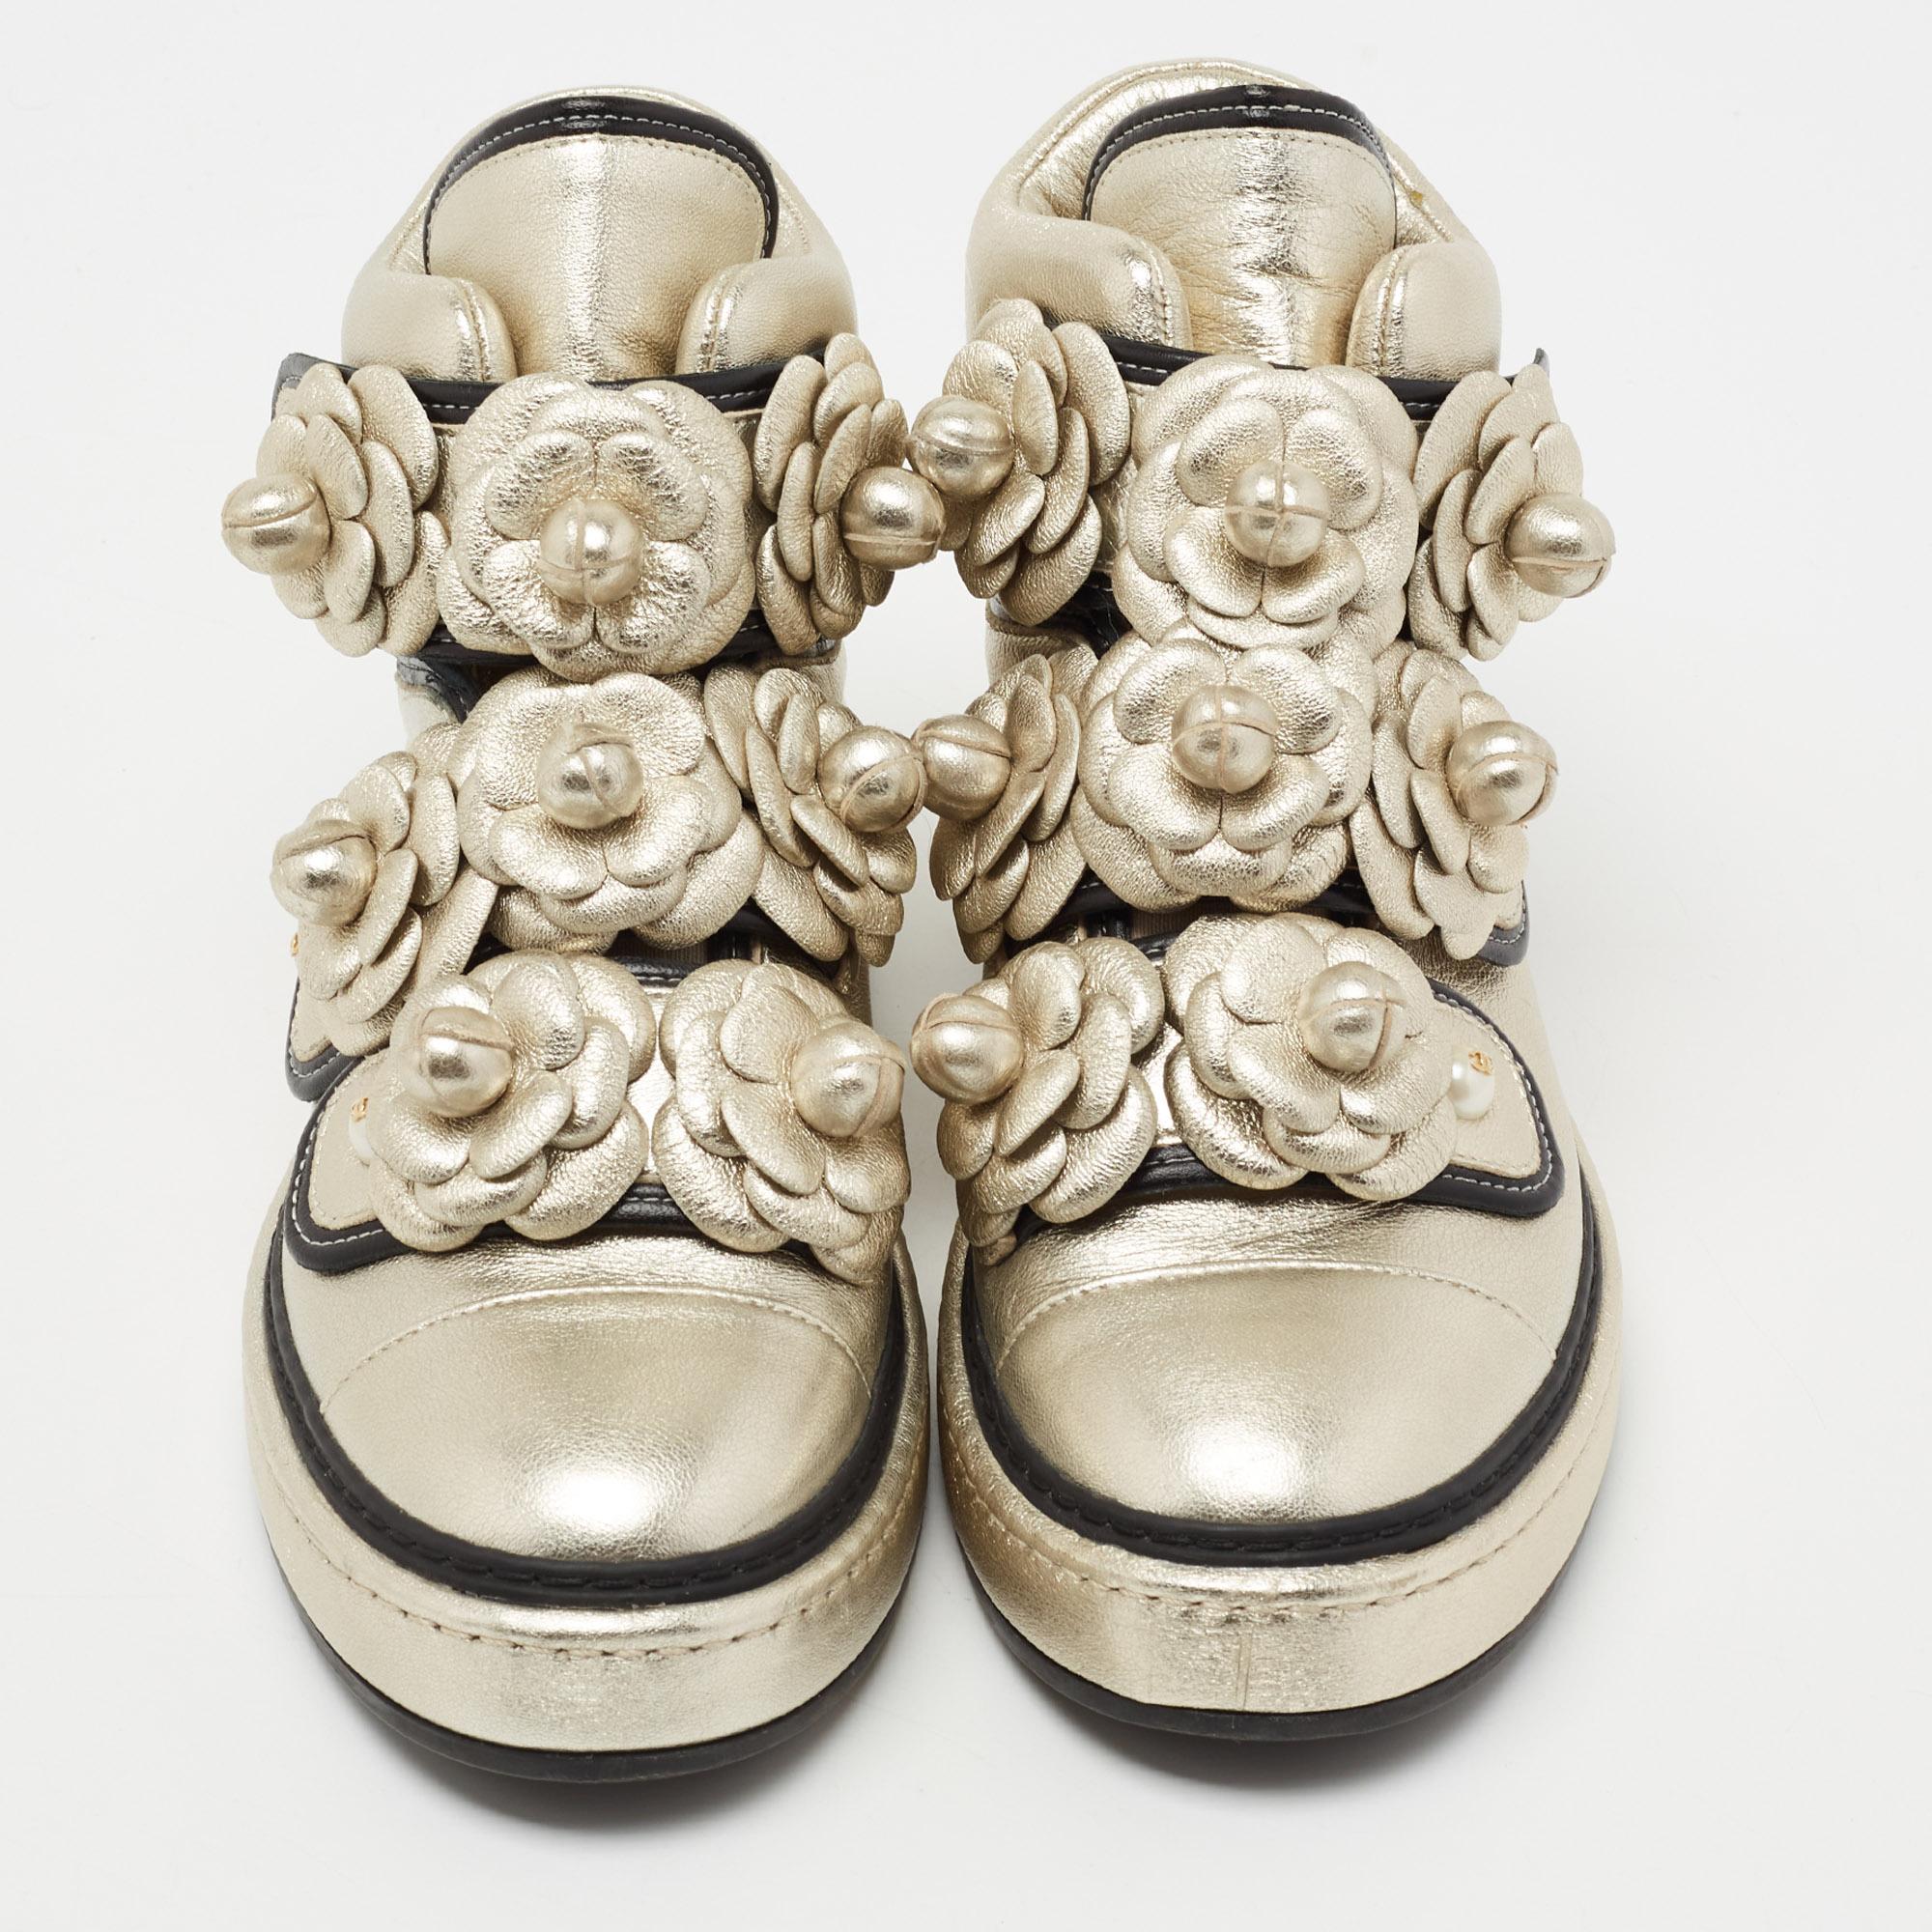 These Chanel sneakers are show-stealers! They've been crafted from leather, styled with velcro straps, and decorated with Camellia flowers on the front. The Camellia was a favorite of 